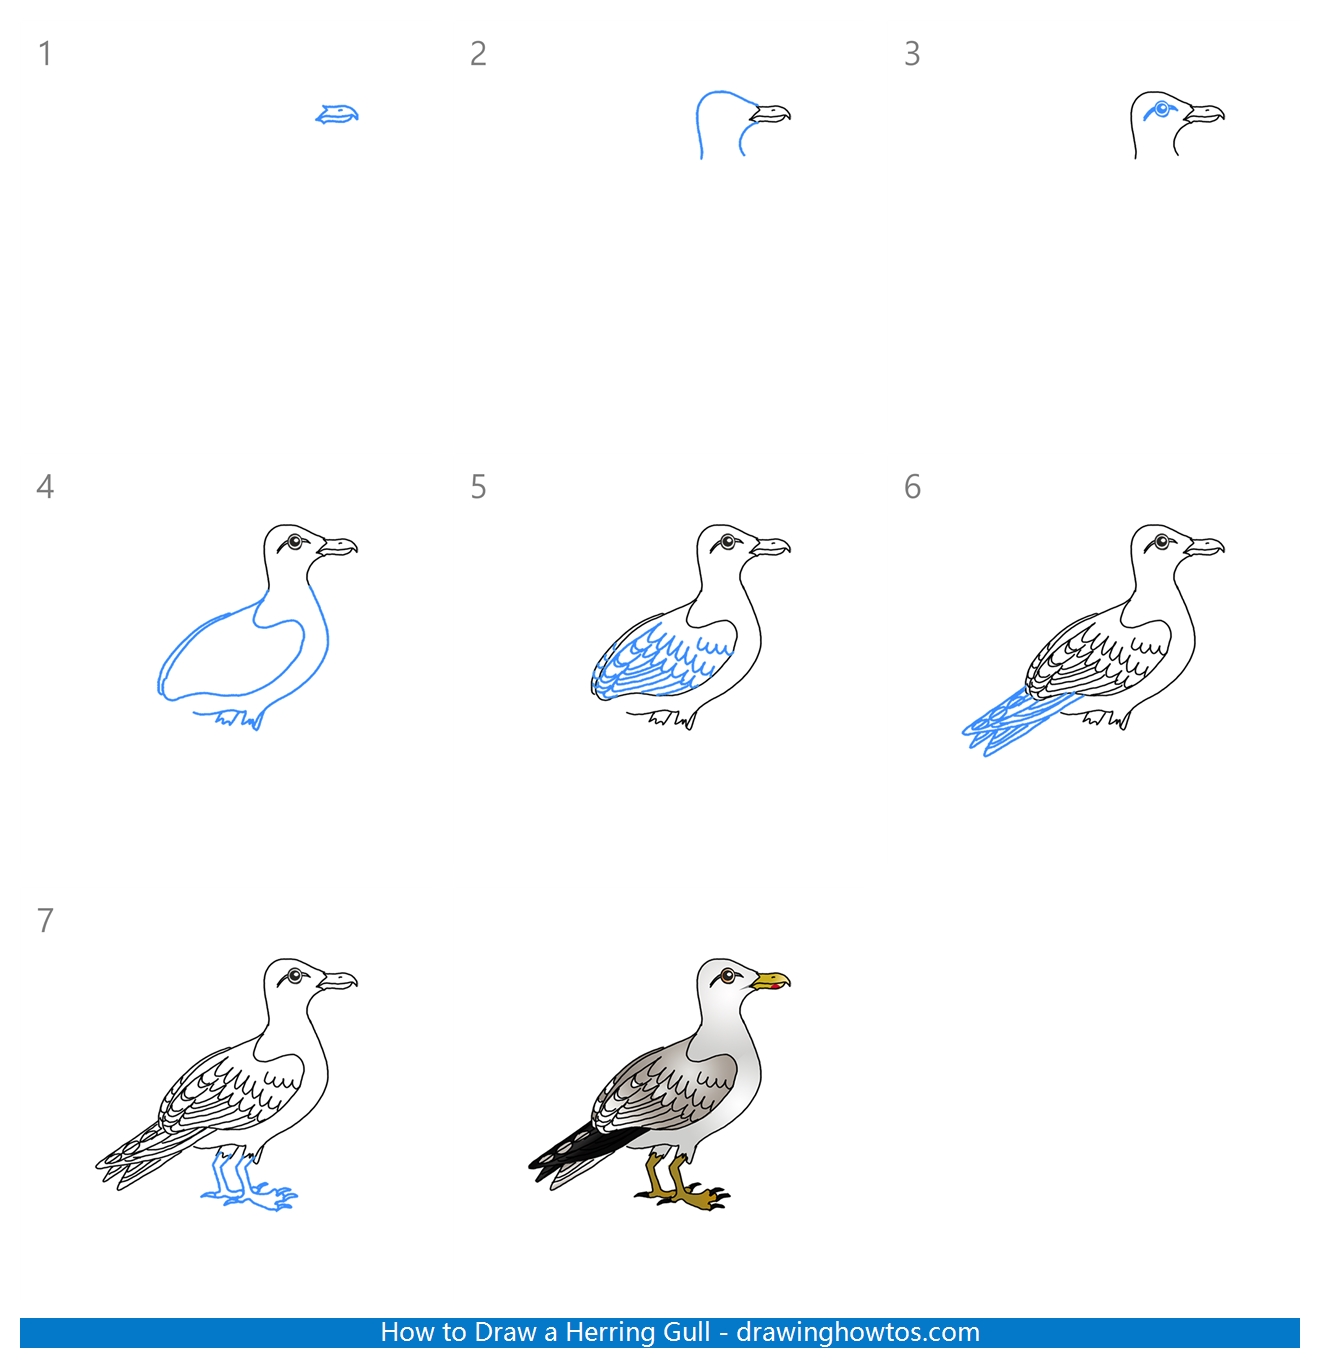 How to Draw a Herring Gull Step by Step